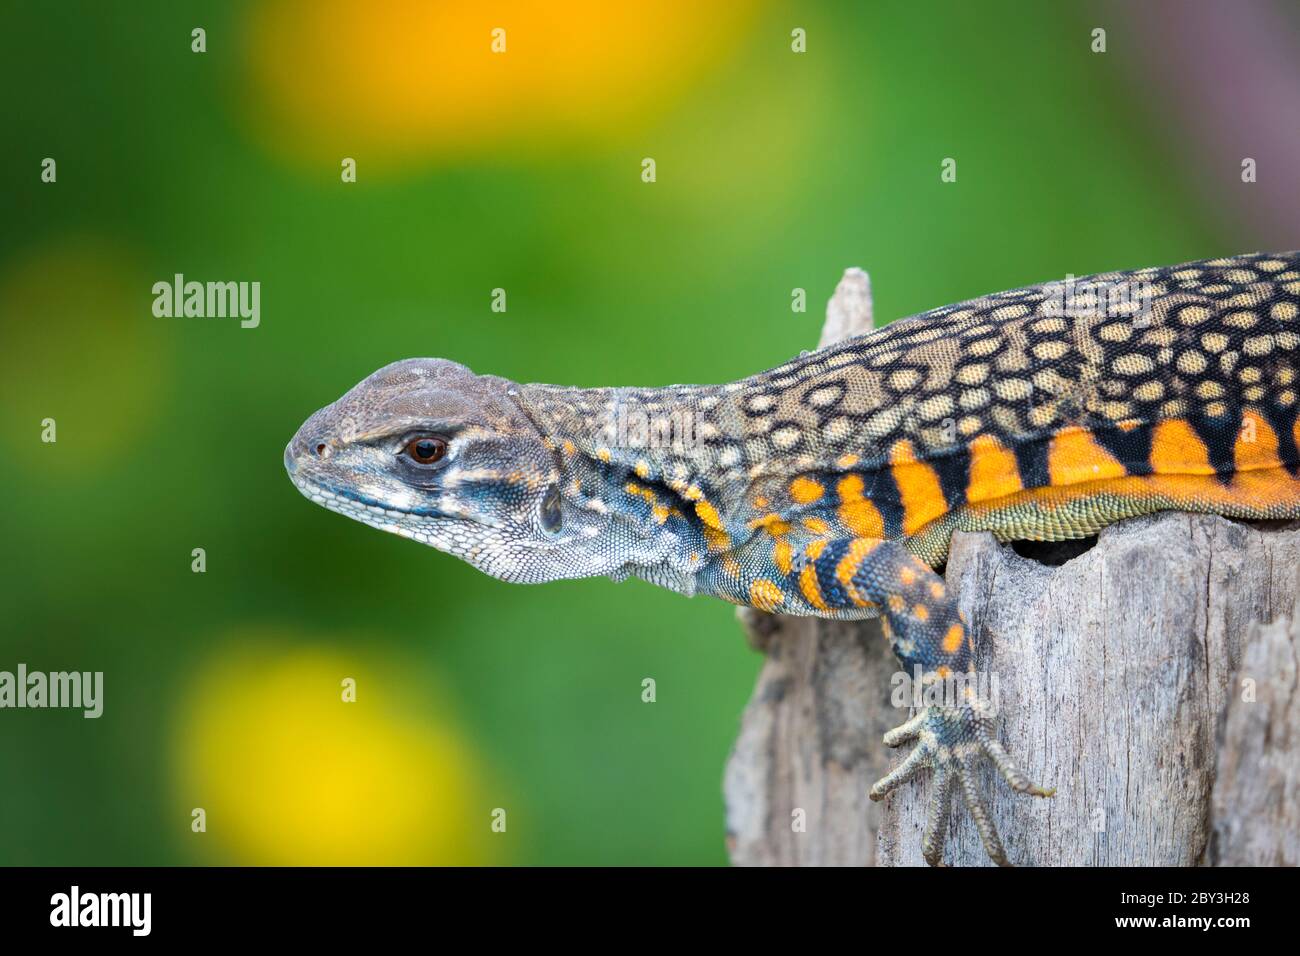 Image of Butterfly Agama Lizard (Leiolepis Cuvier) on nature background. . Reptile Animal Stock Photo